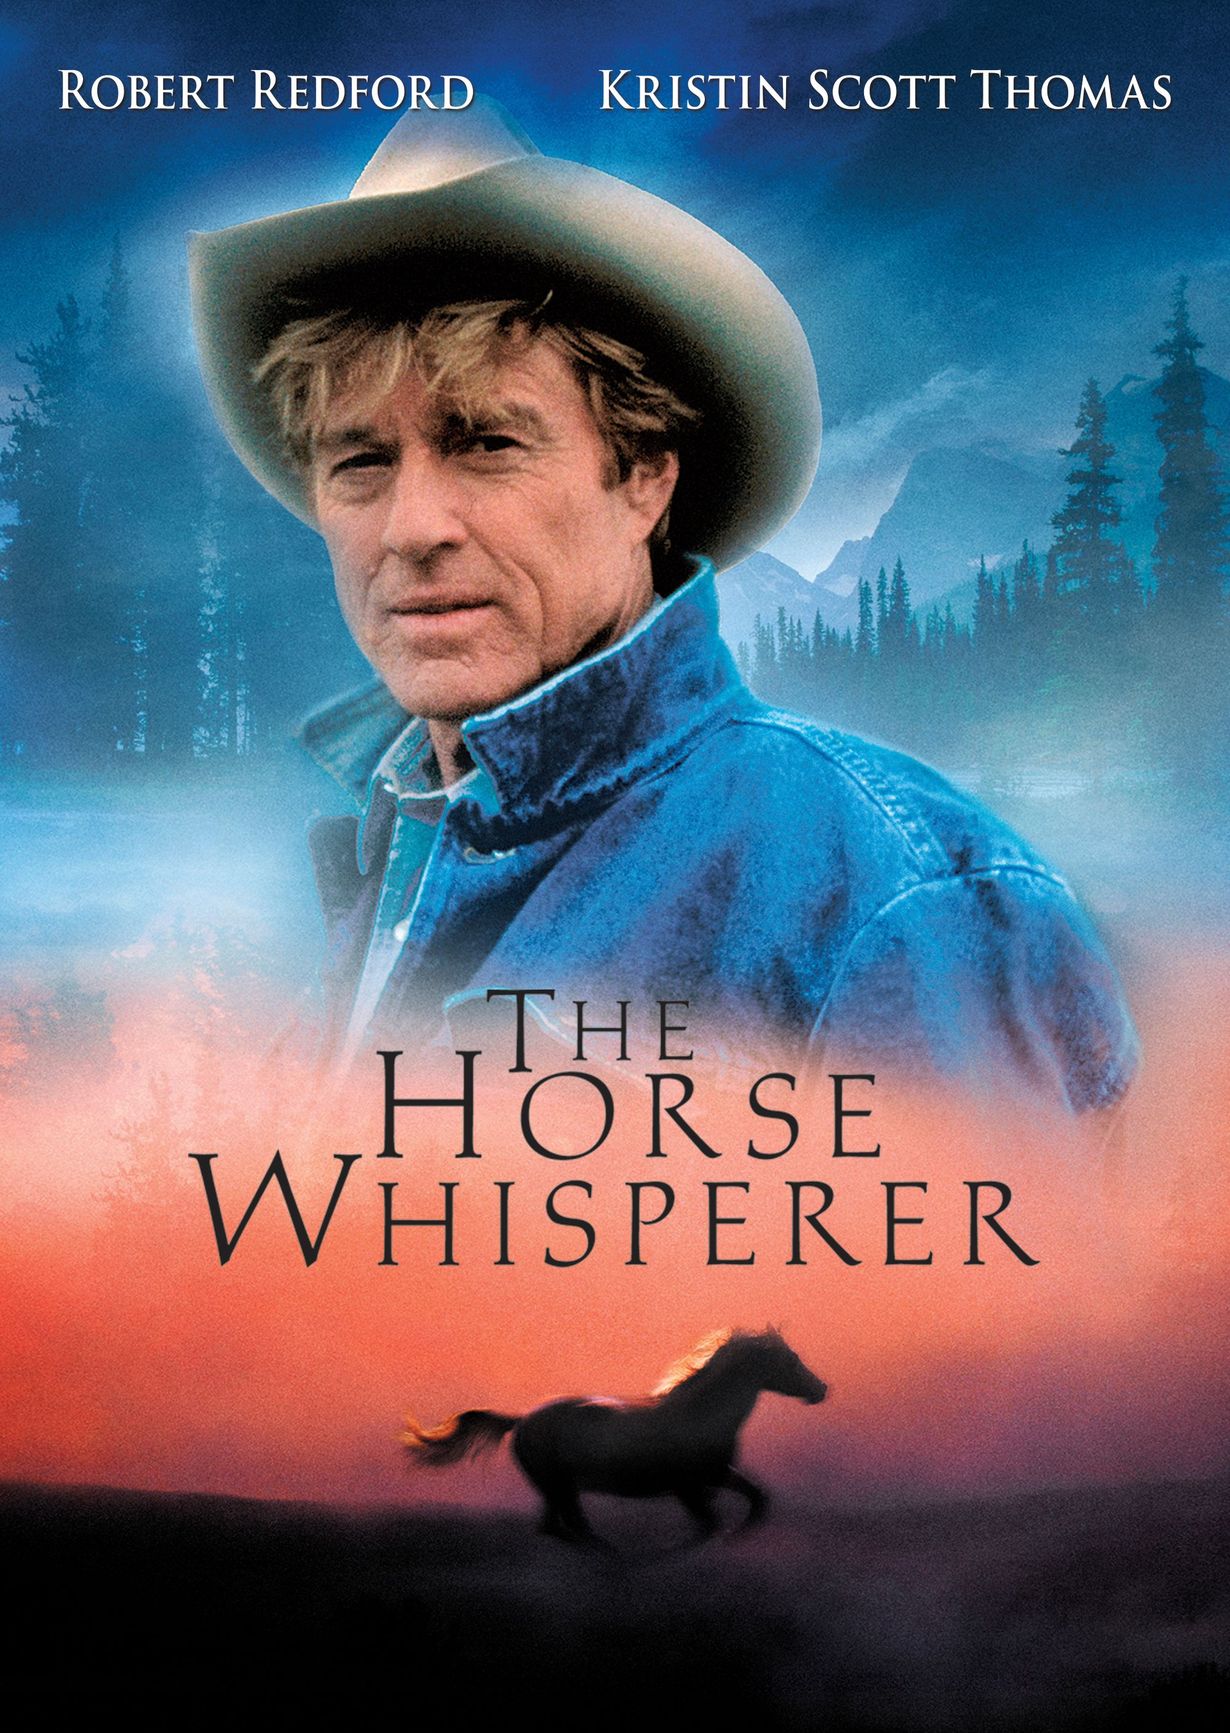 The Horse Whisperer Movie TV Listings and Schedule | TV Guide